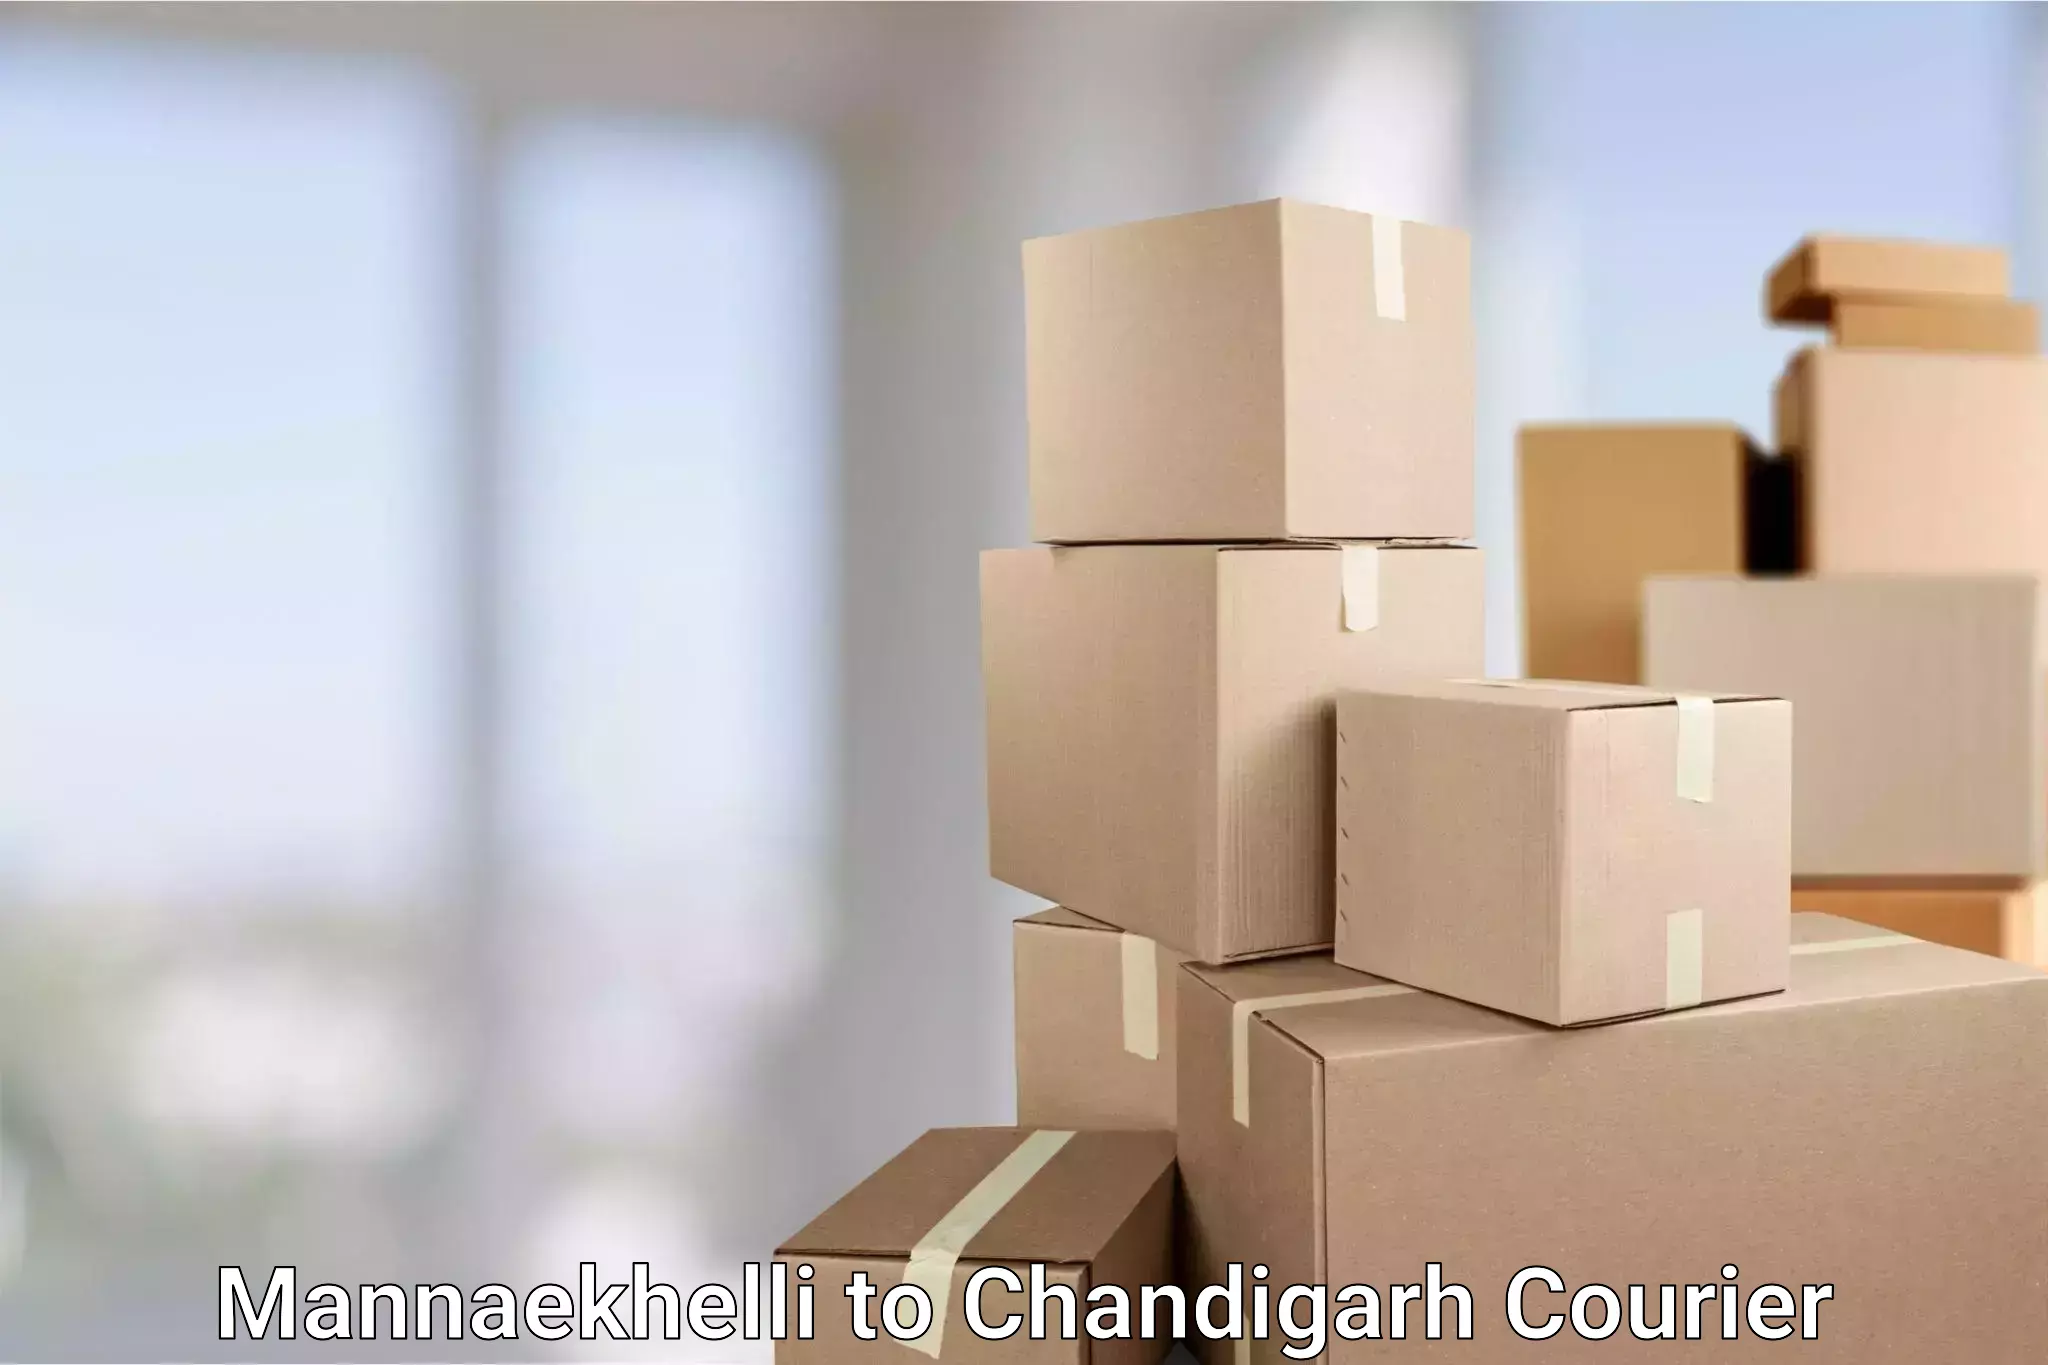 Global courier networks Mannaekhelli to Chandigarh